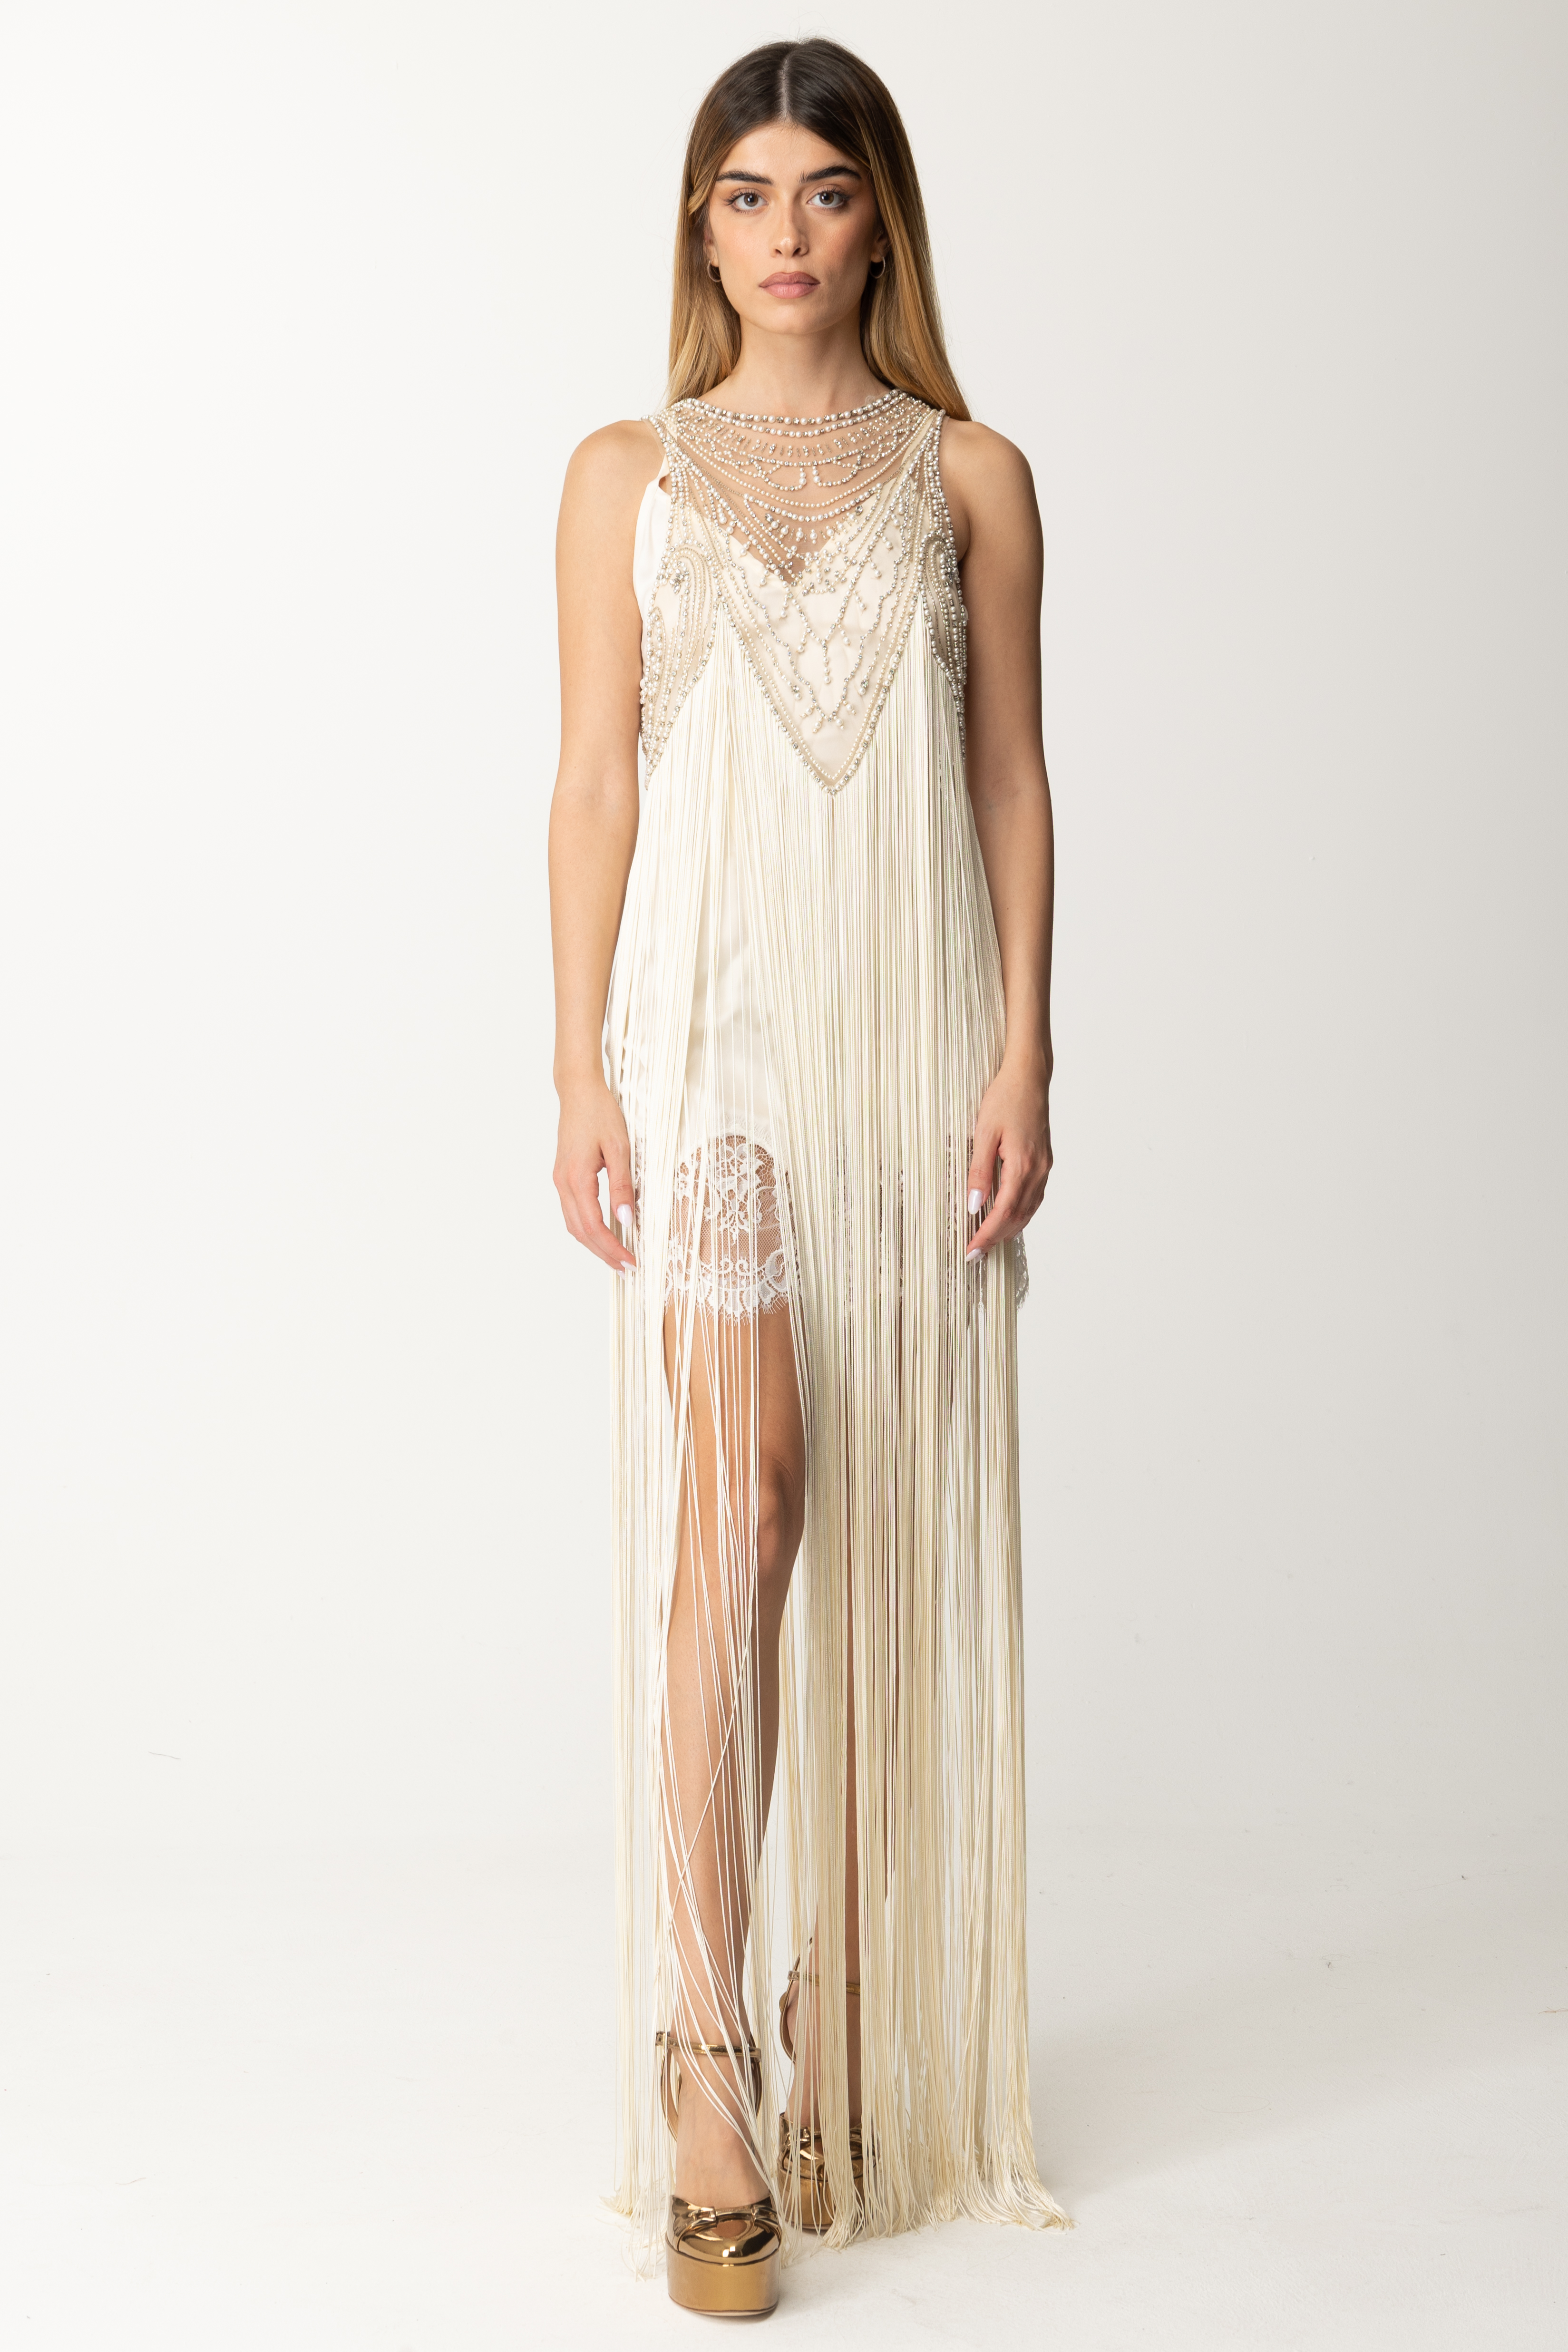 Preview: Elisabetta Franchi Red Carpet Dress with Slip and Fringes Burro